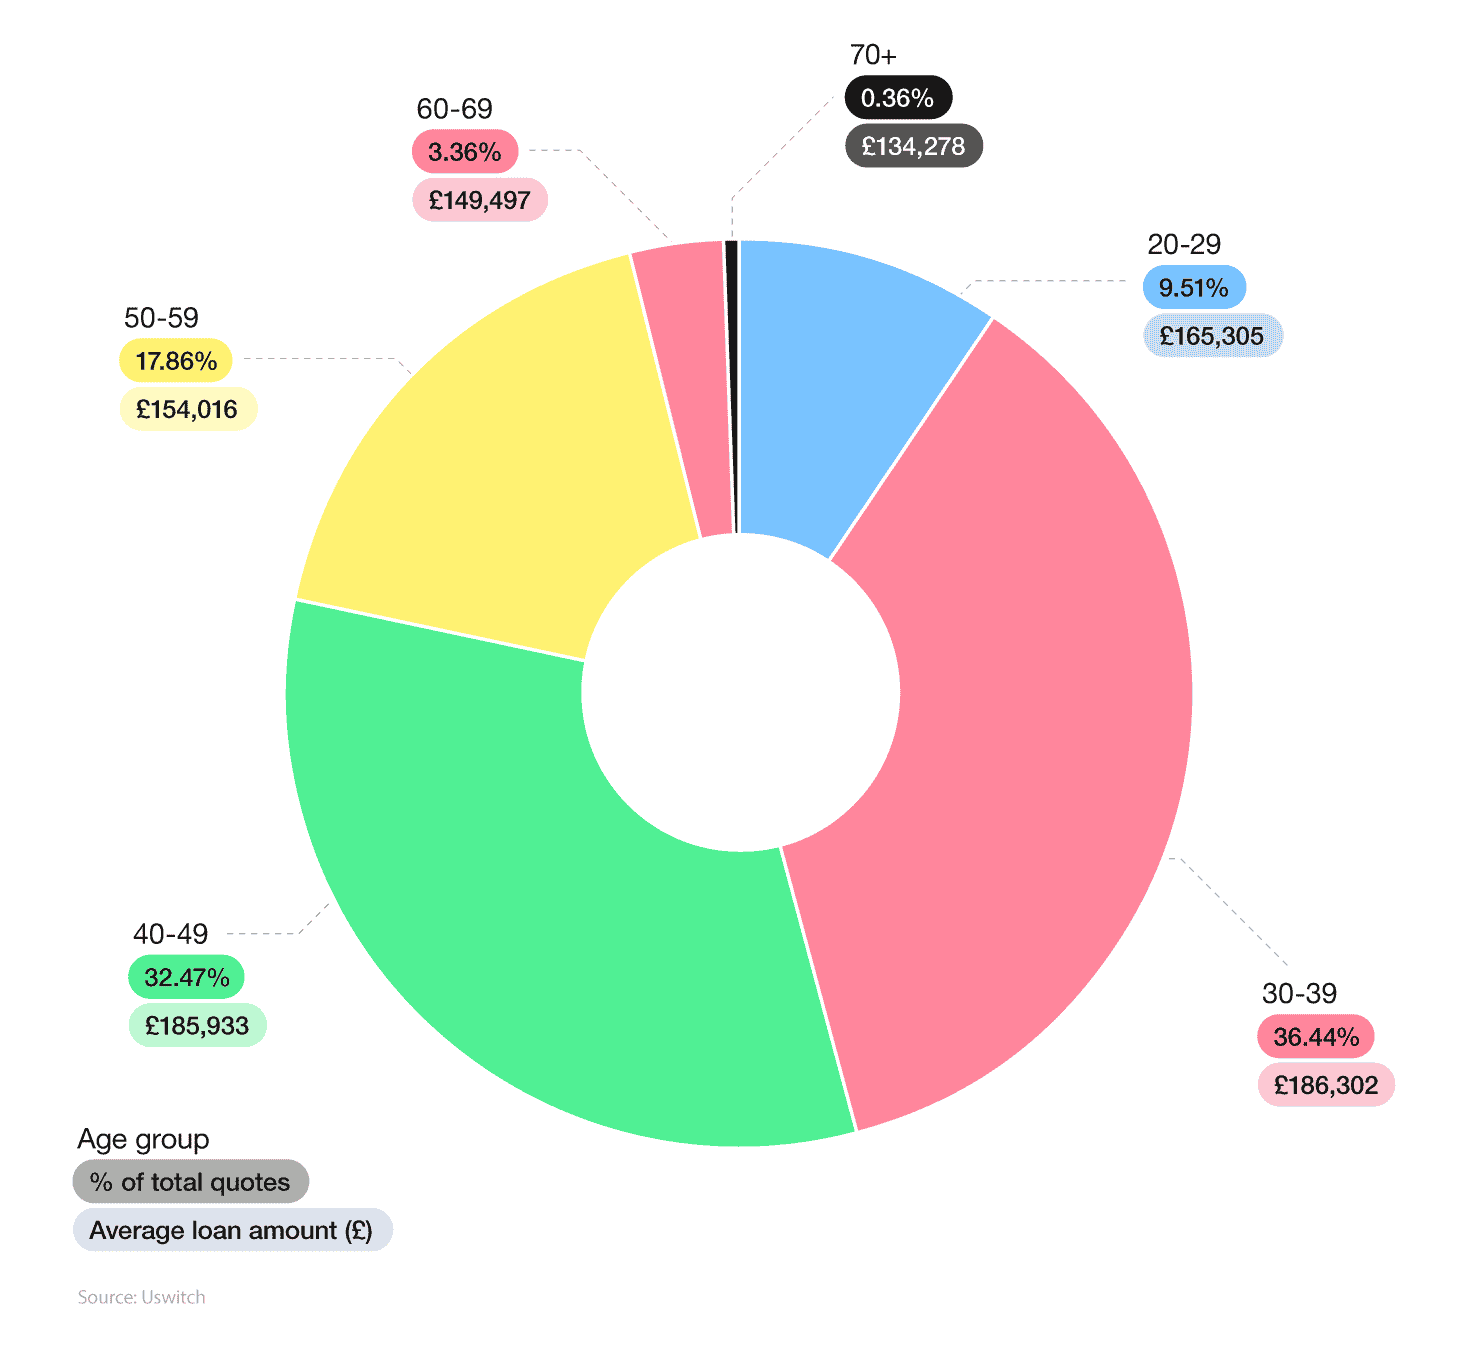 Donut chart showing UK average mortgage statistics by age group